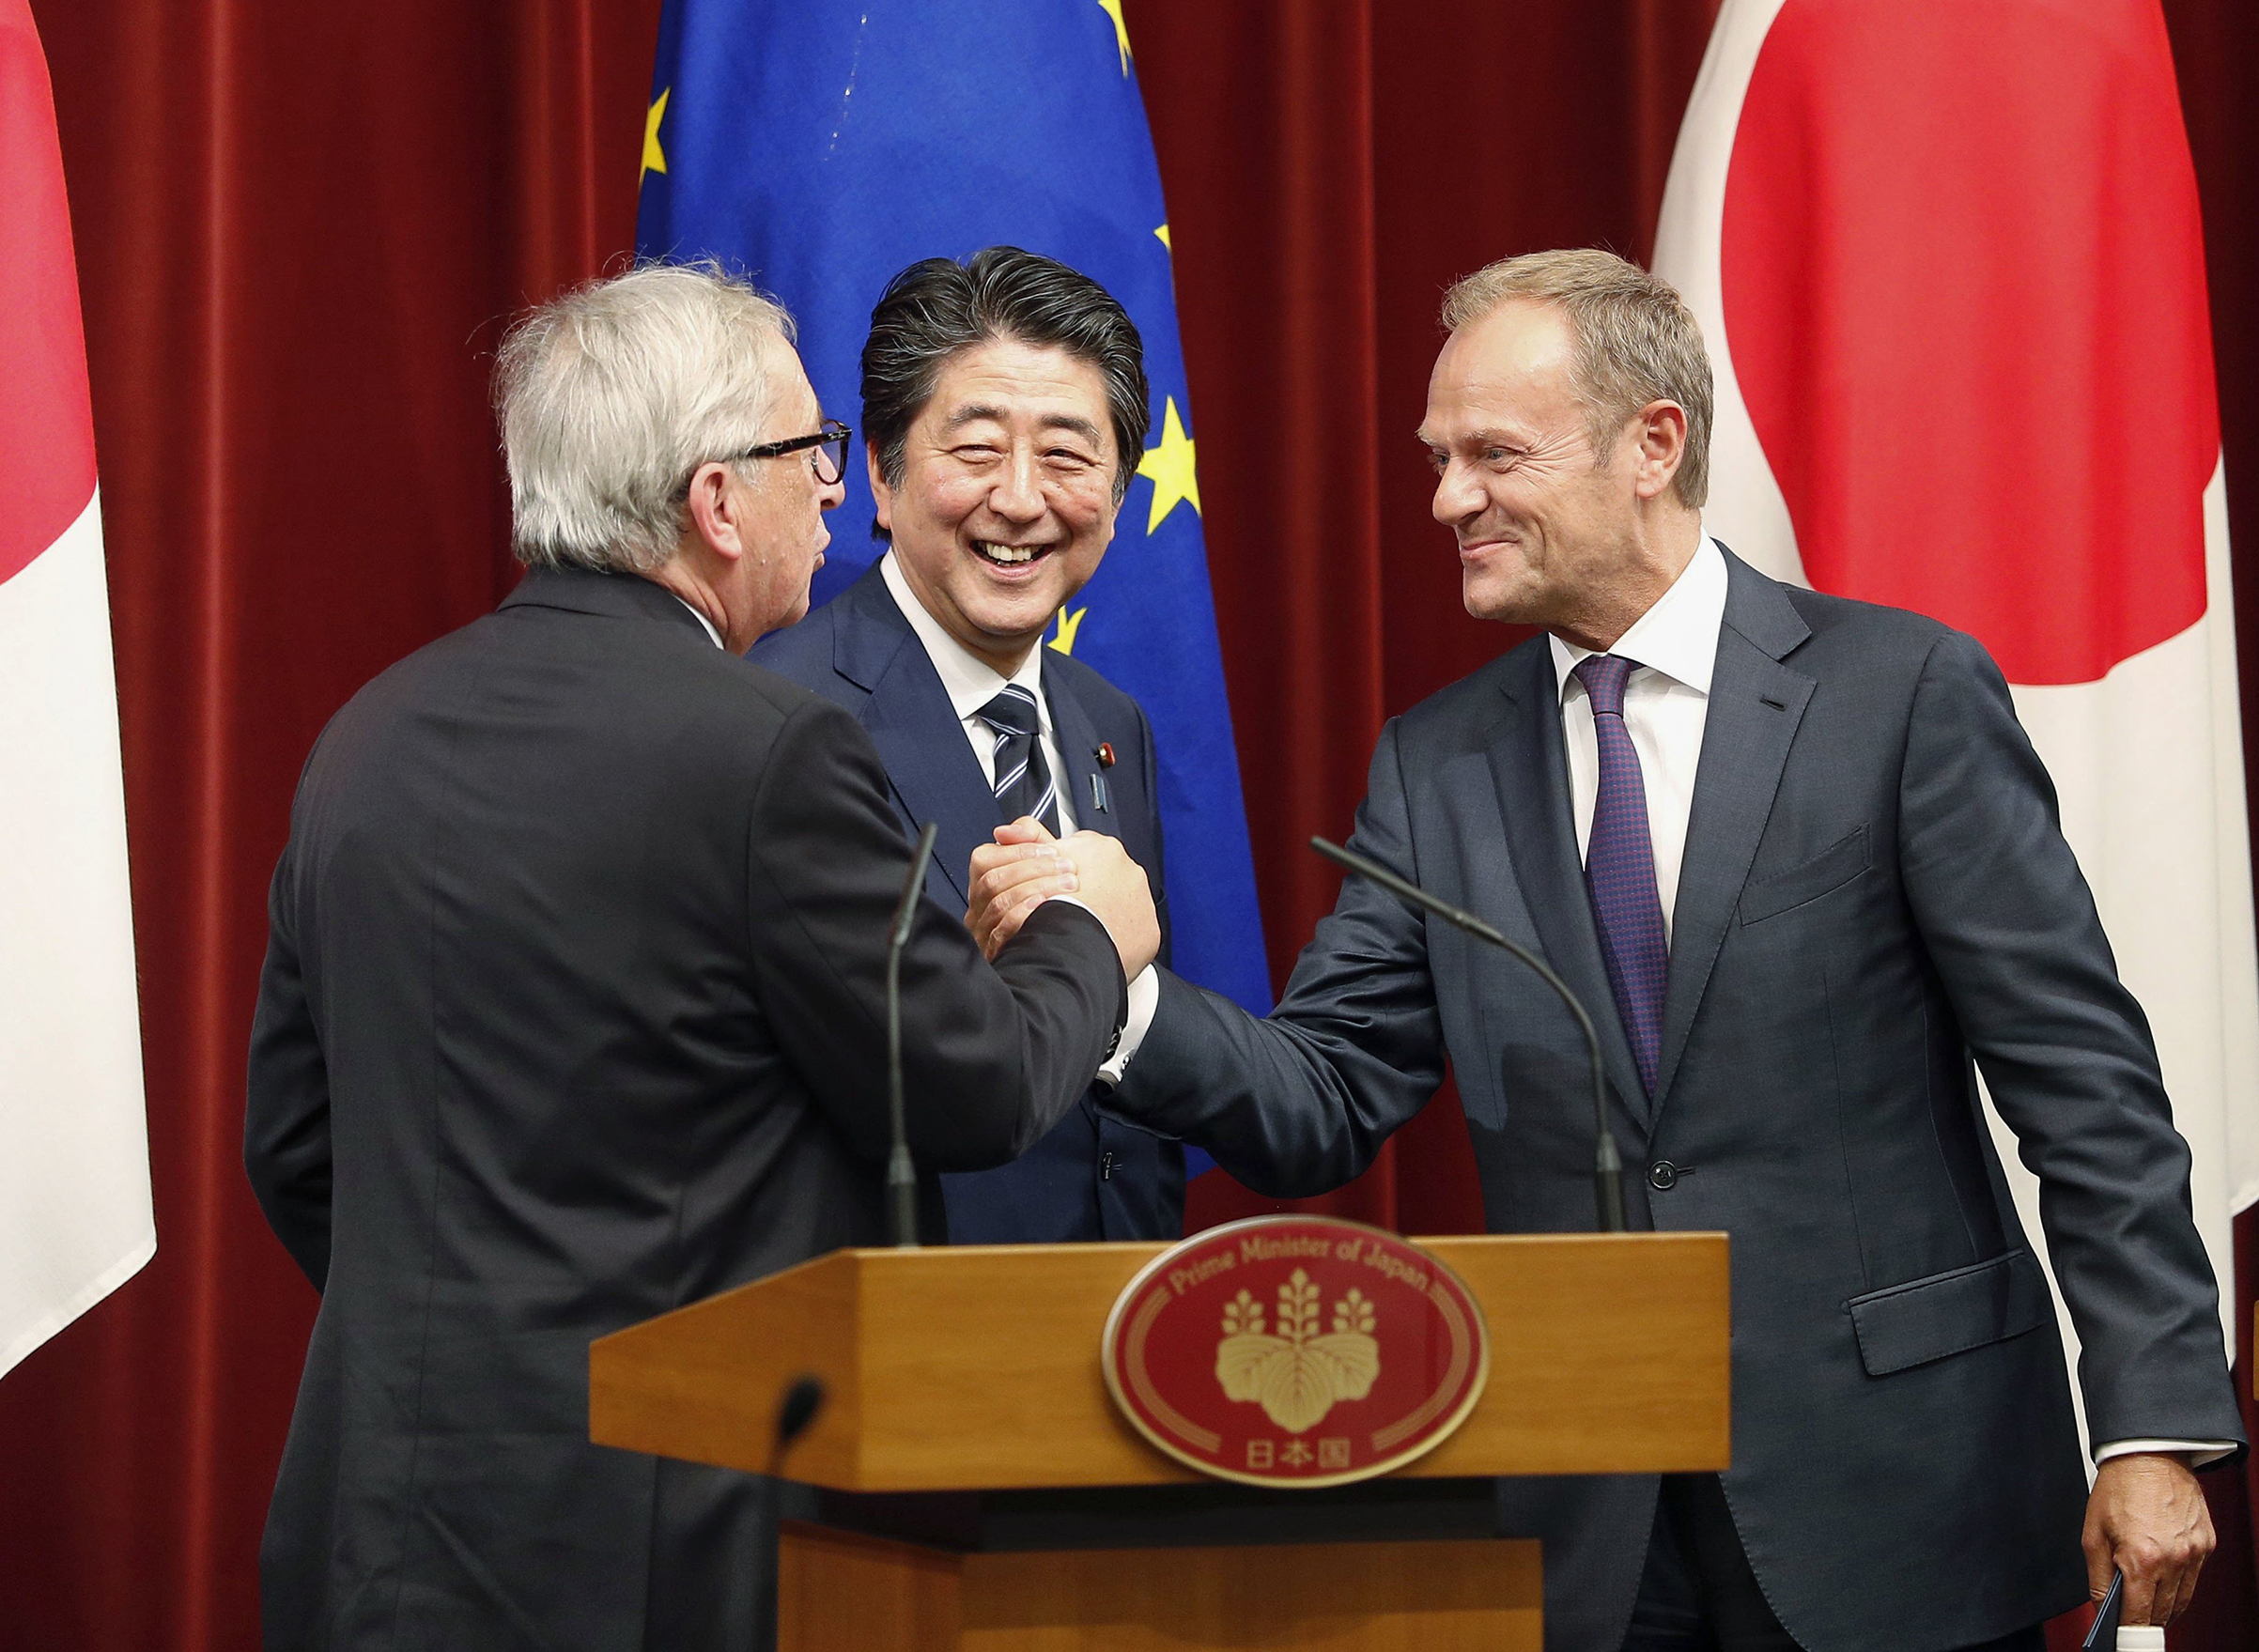 European Council President Donald Tusk (R) and European Commission President Jean-Claude Juncker (L), alongside Japanese Prime Minister Shinzo Abe, shake hands at Abe's office in Tokyo on July 17, 2018, after they signed a free trade deal with Japan. (Kyodo News/Sipa USA)